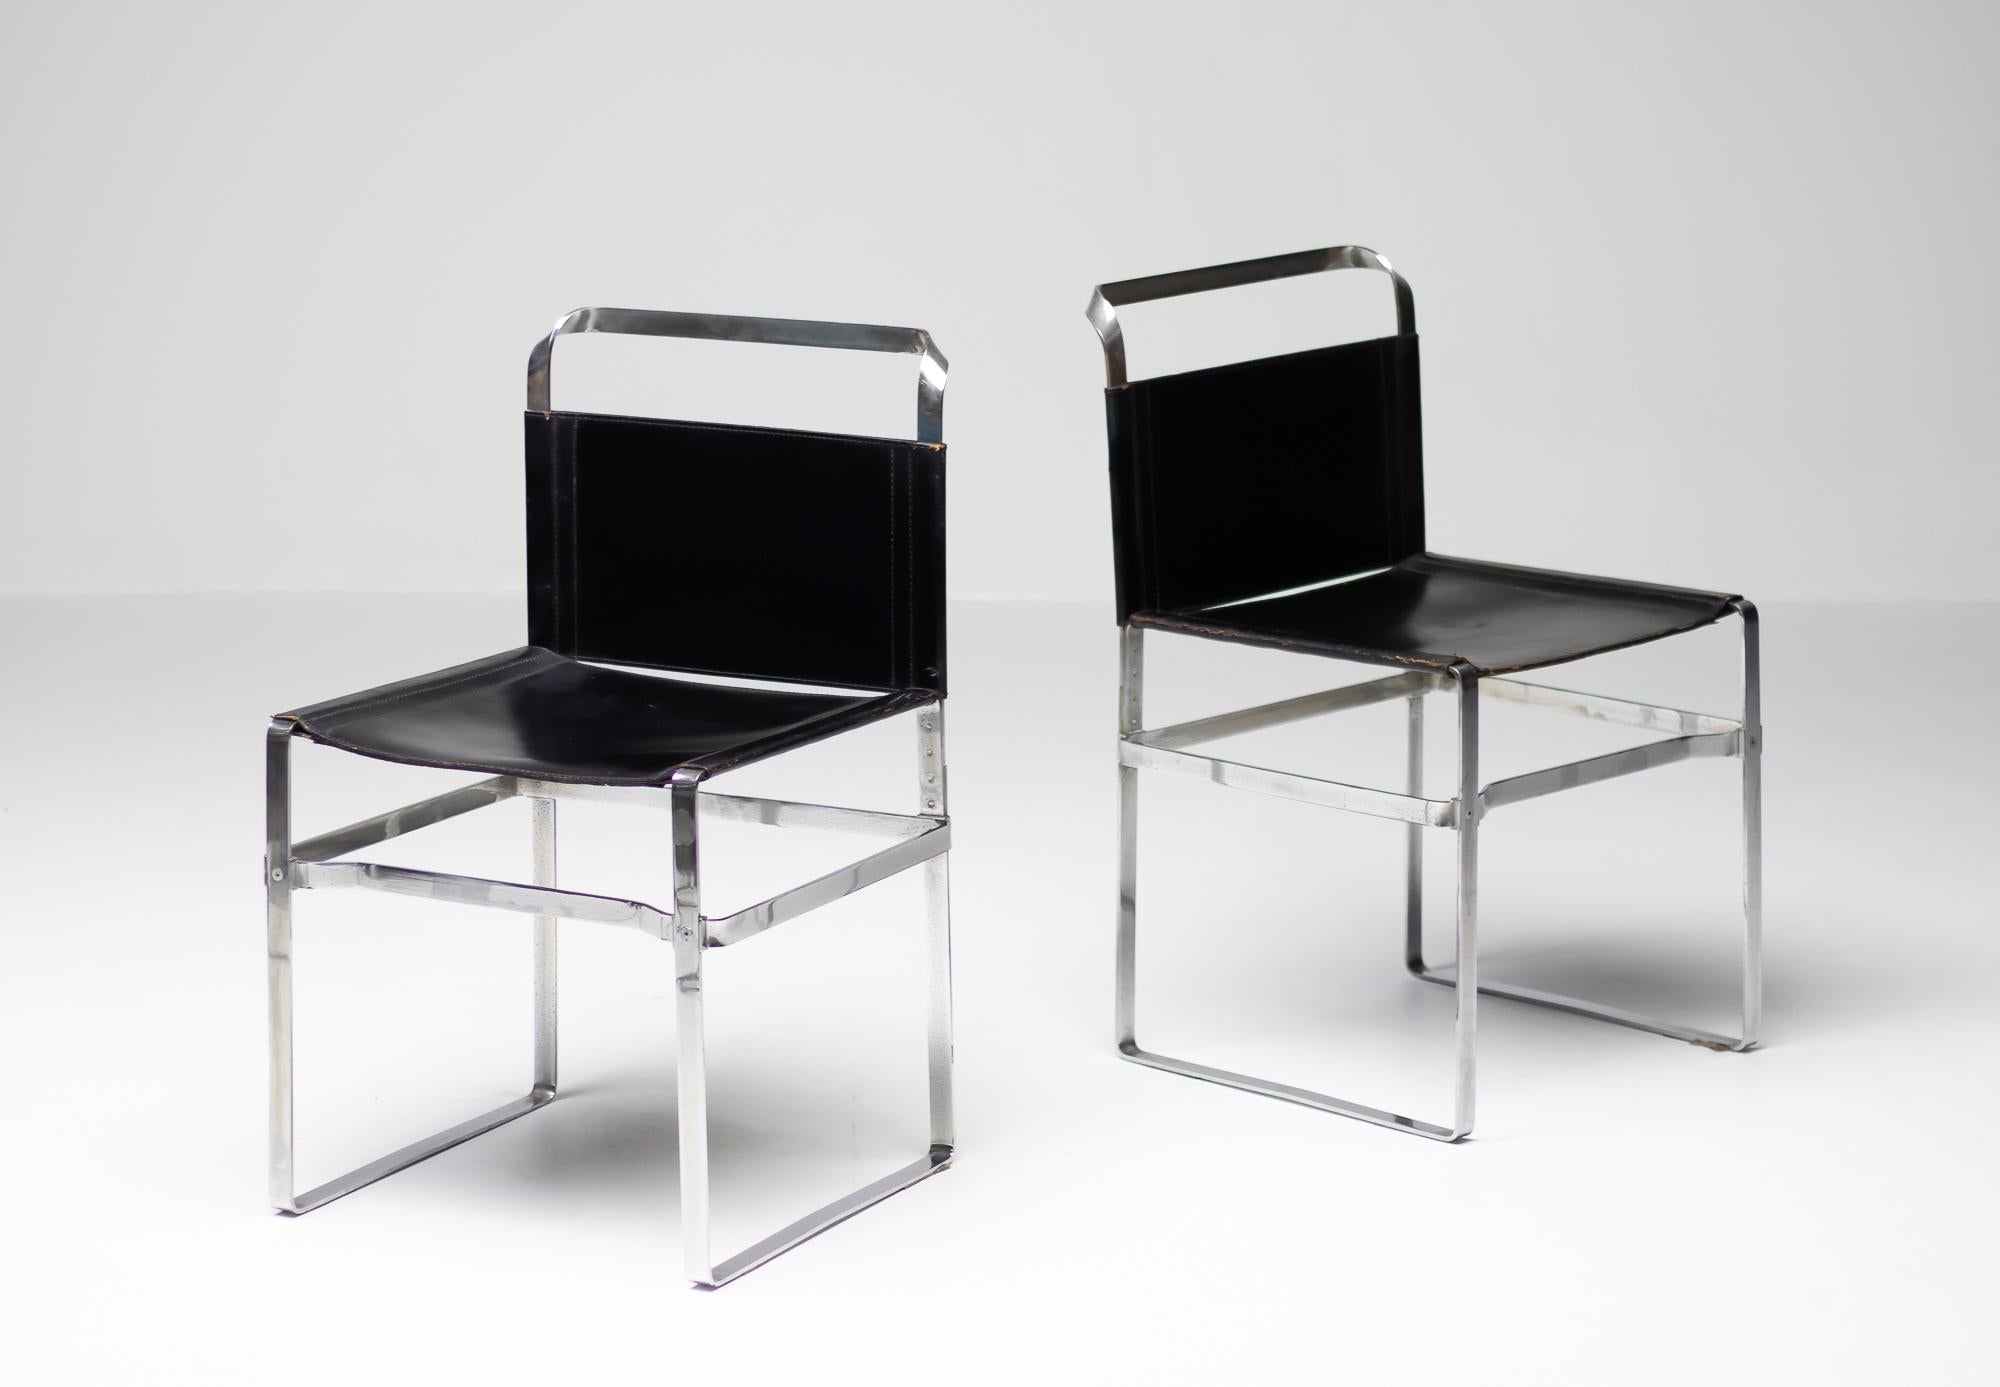 Elegant pair of side chairs made in chrome-plated steel strip and black leather.
Minimalist design with beautiful details.
Priced individually.